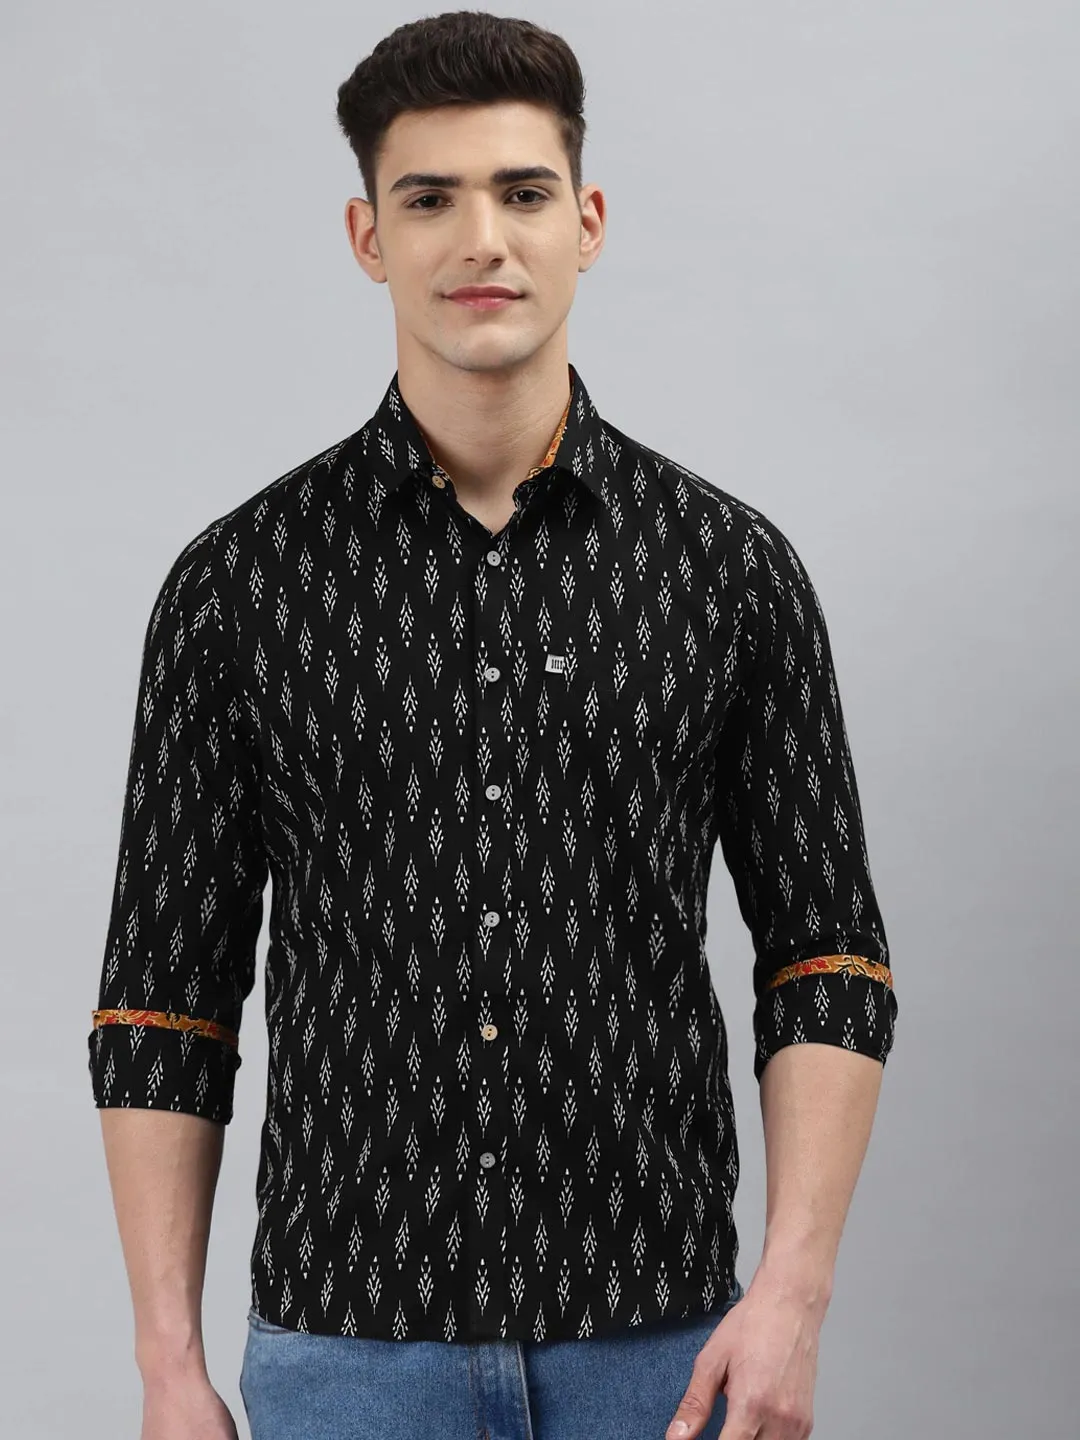 Styling Tips and Trends: All About Men’s Printed Casual Shirts – Readiprint Fashions